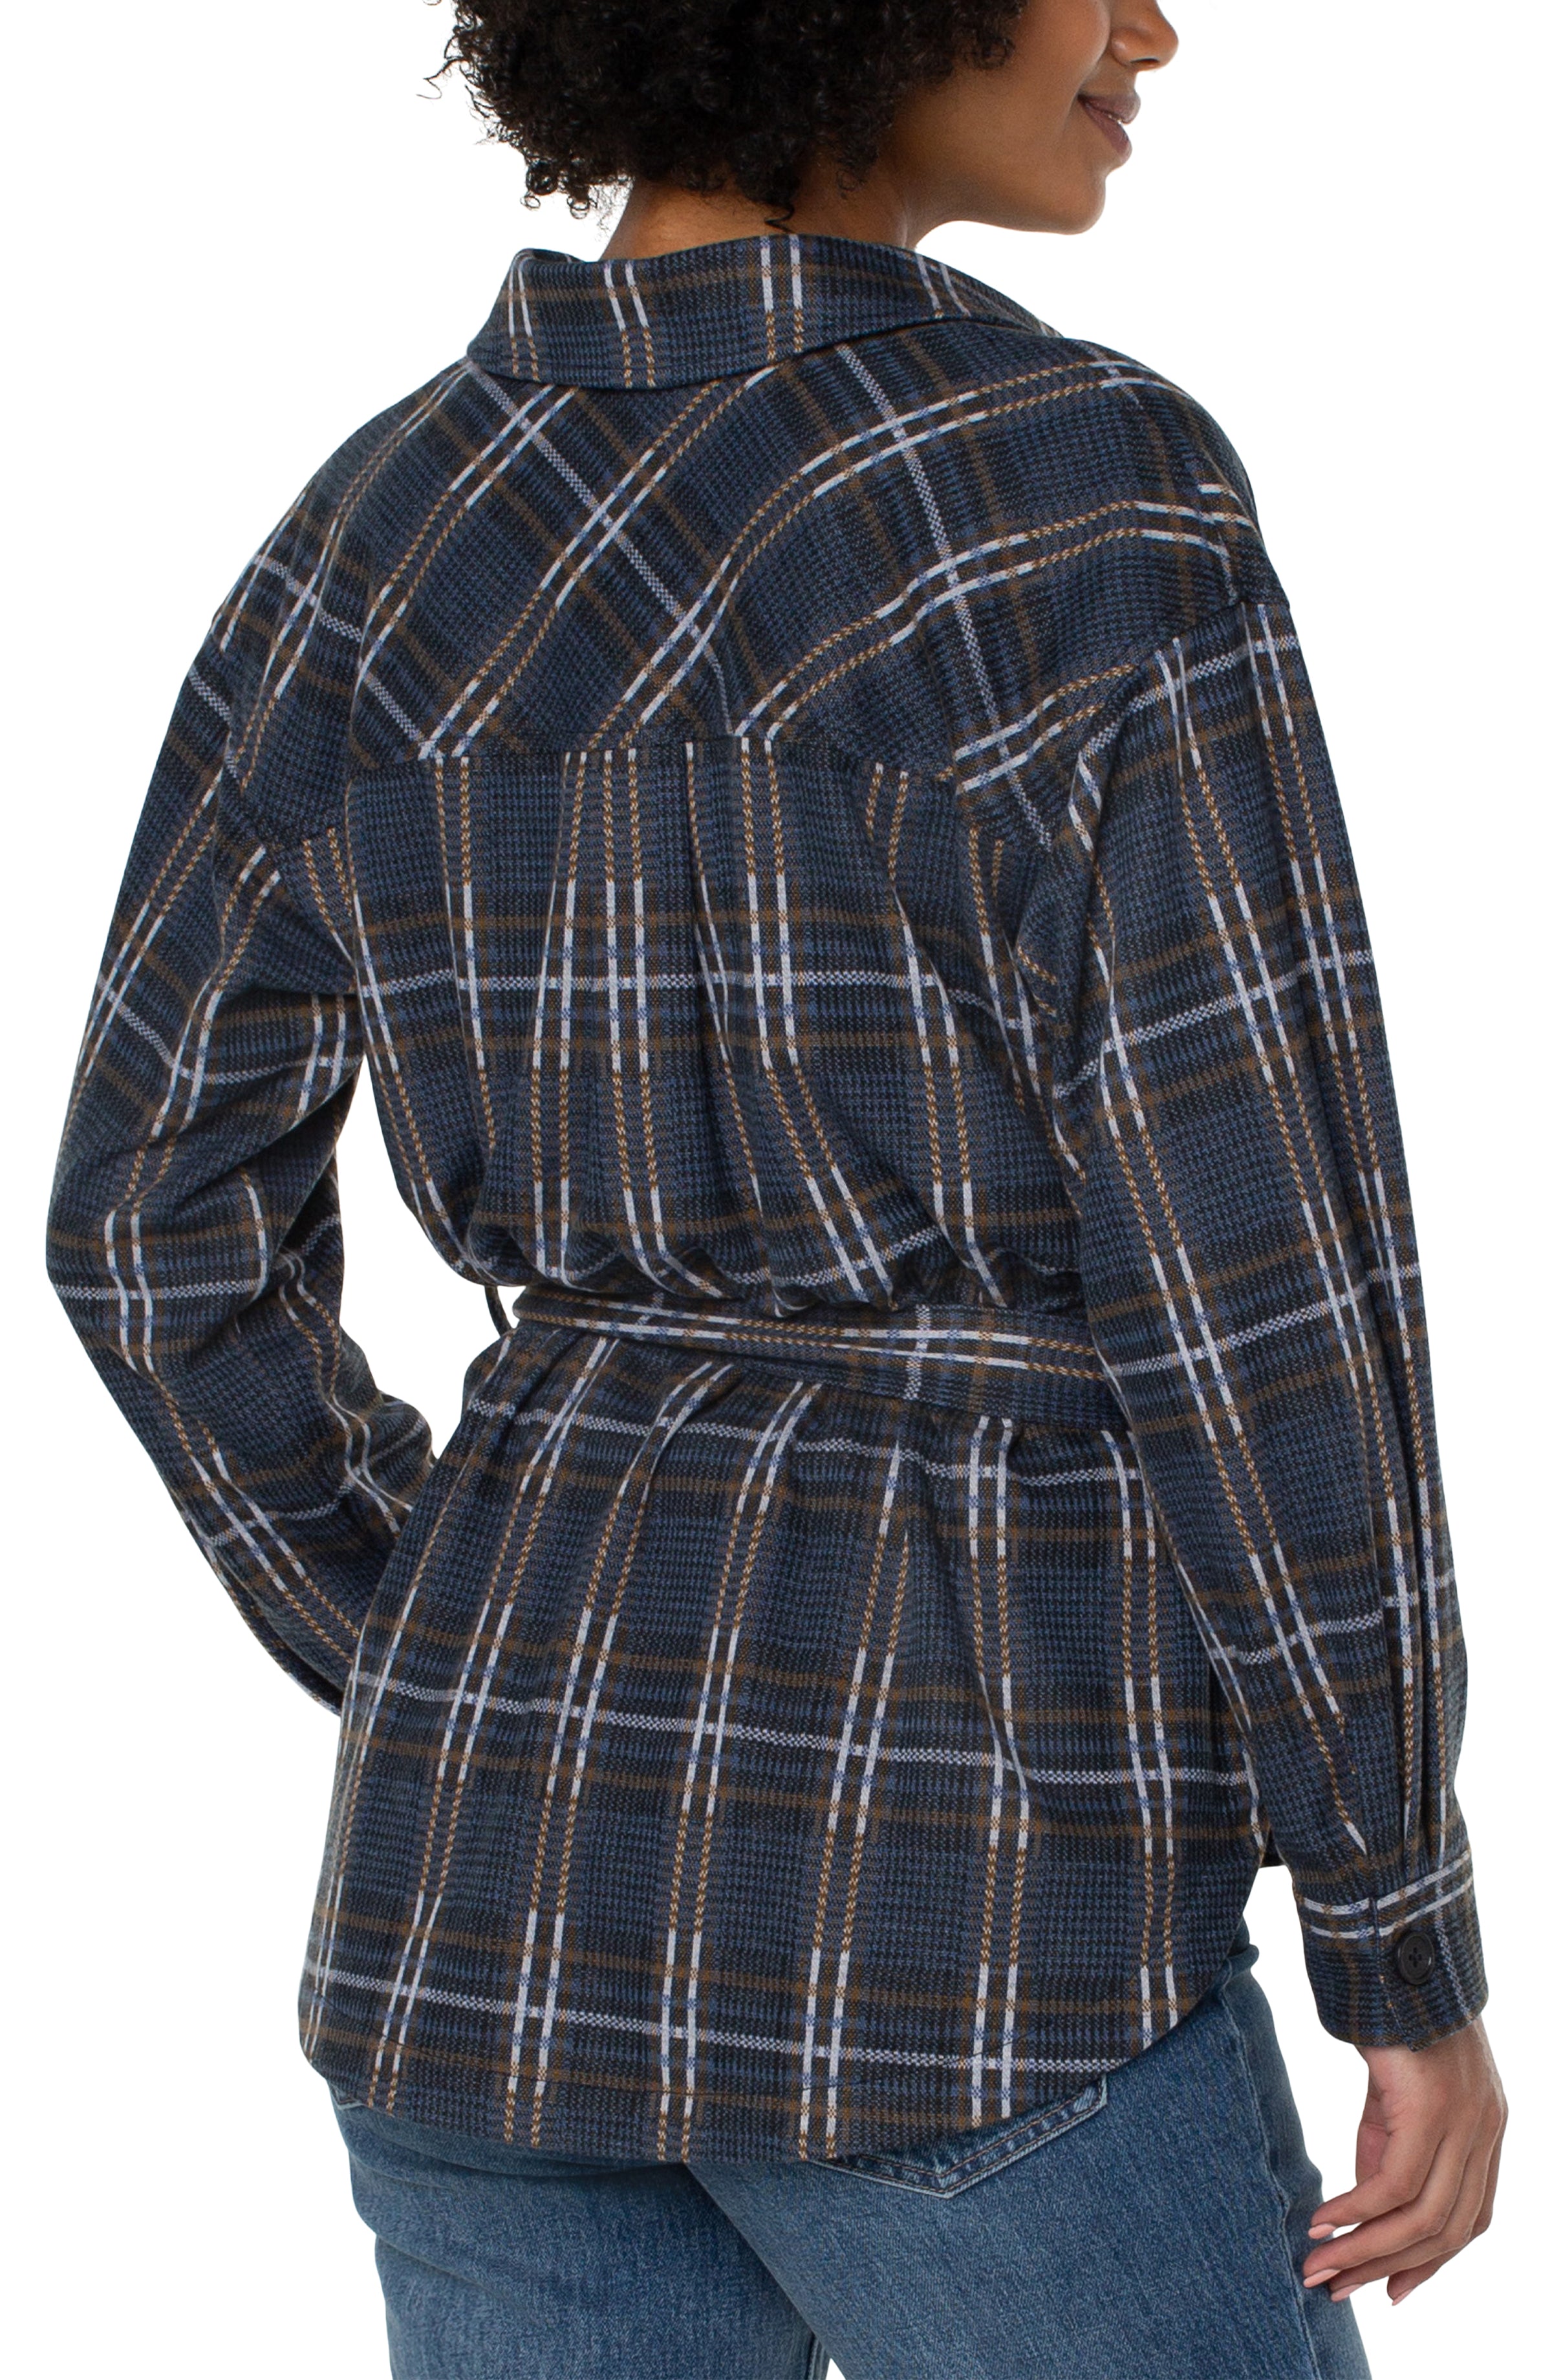 Liverpool Casual Jacket - Black Queen Blue Plaid Back View